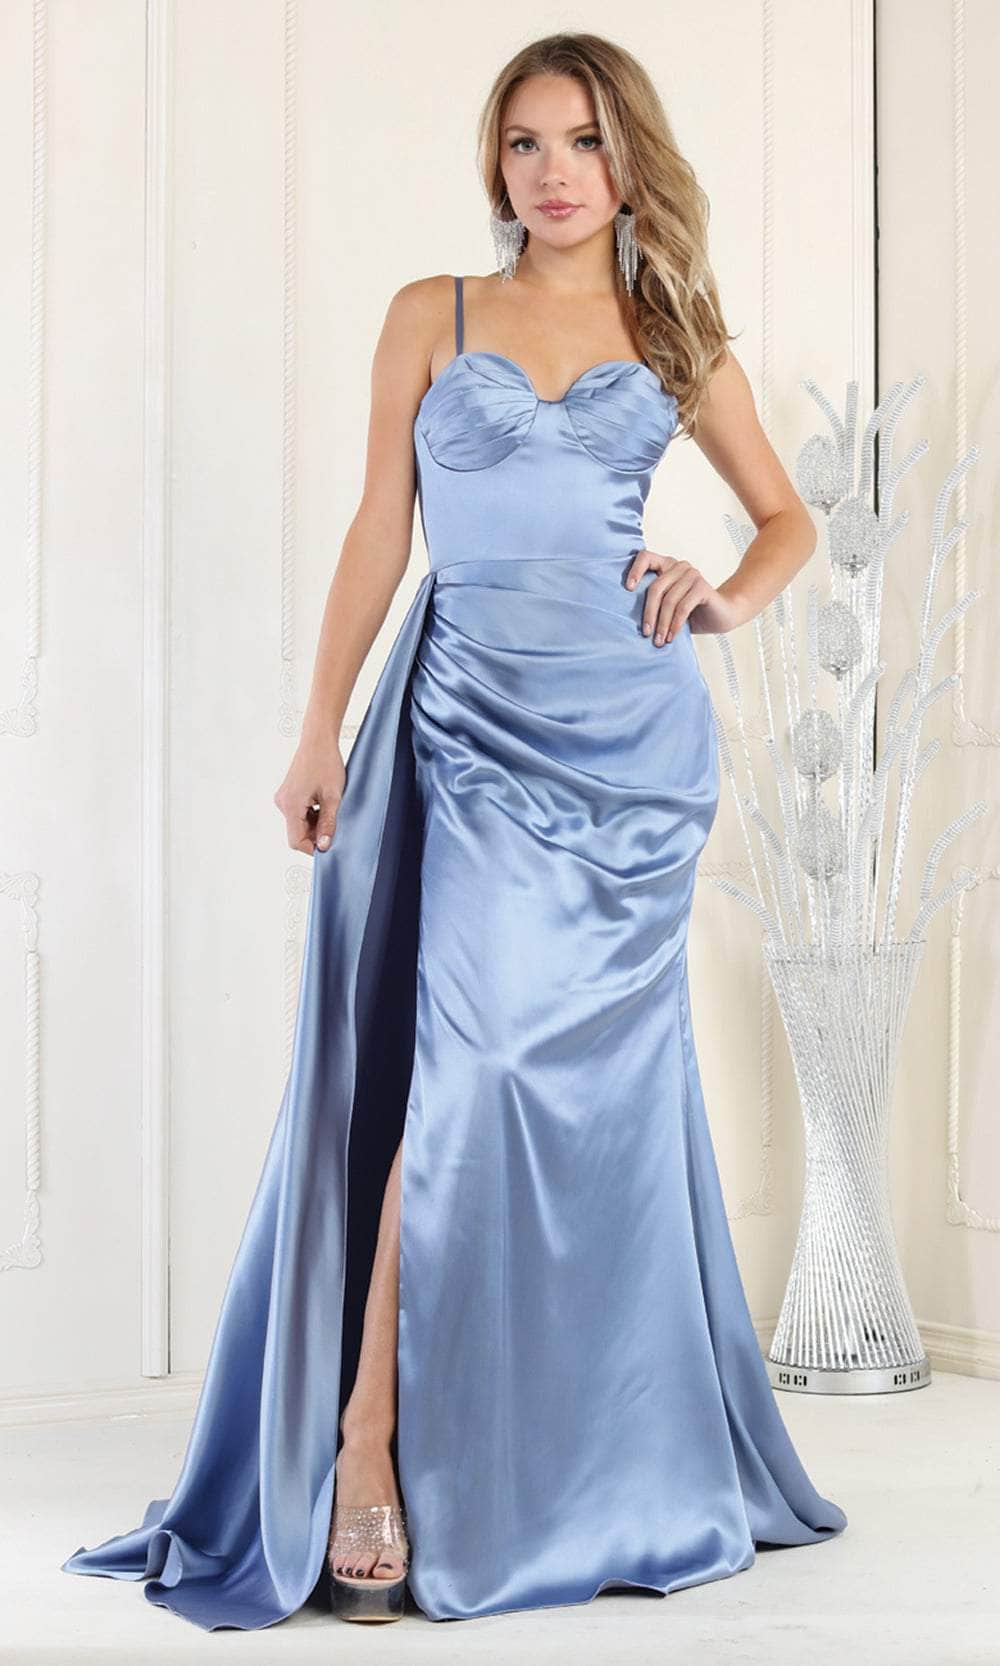 Image of May Queen RQ7960 - Sweetheart Sleeveless Prom Dress